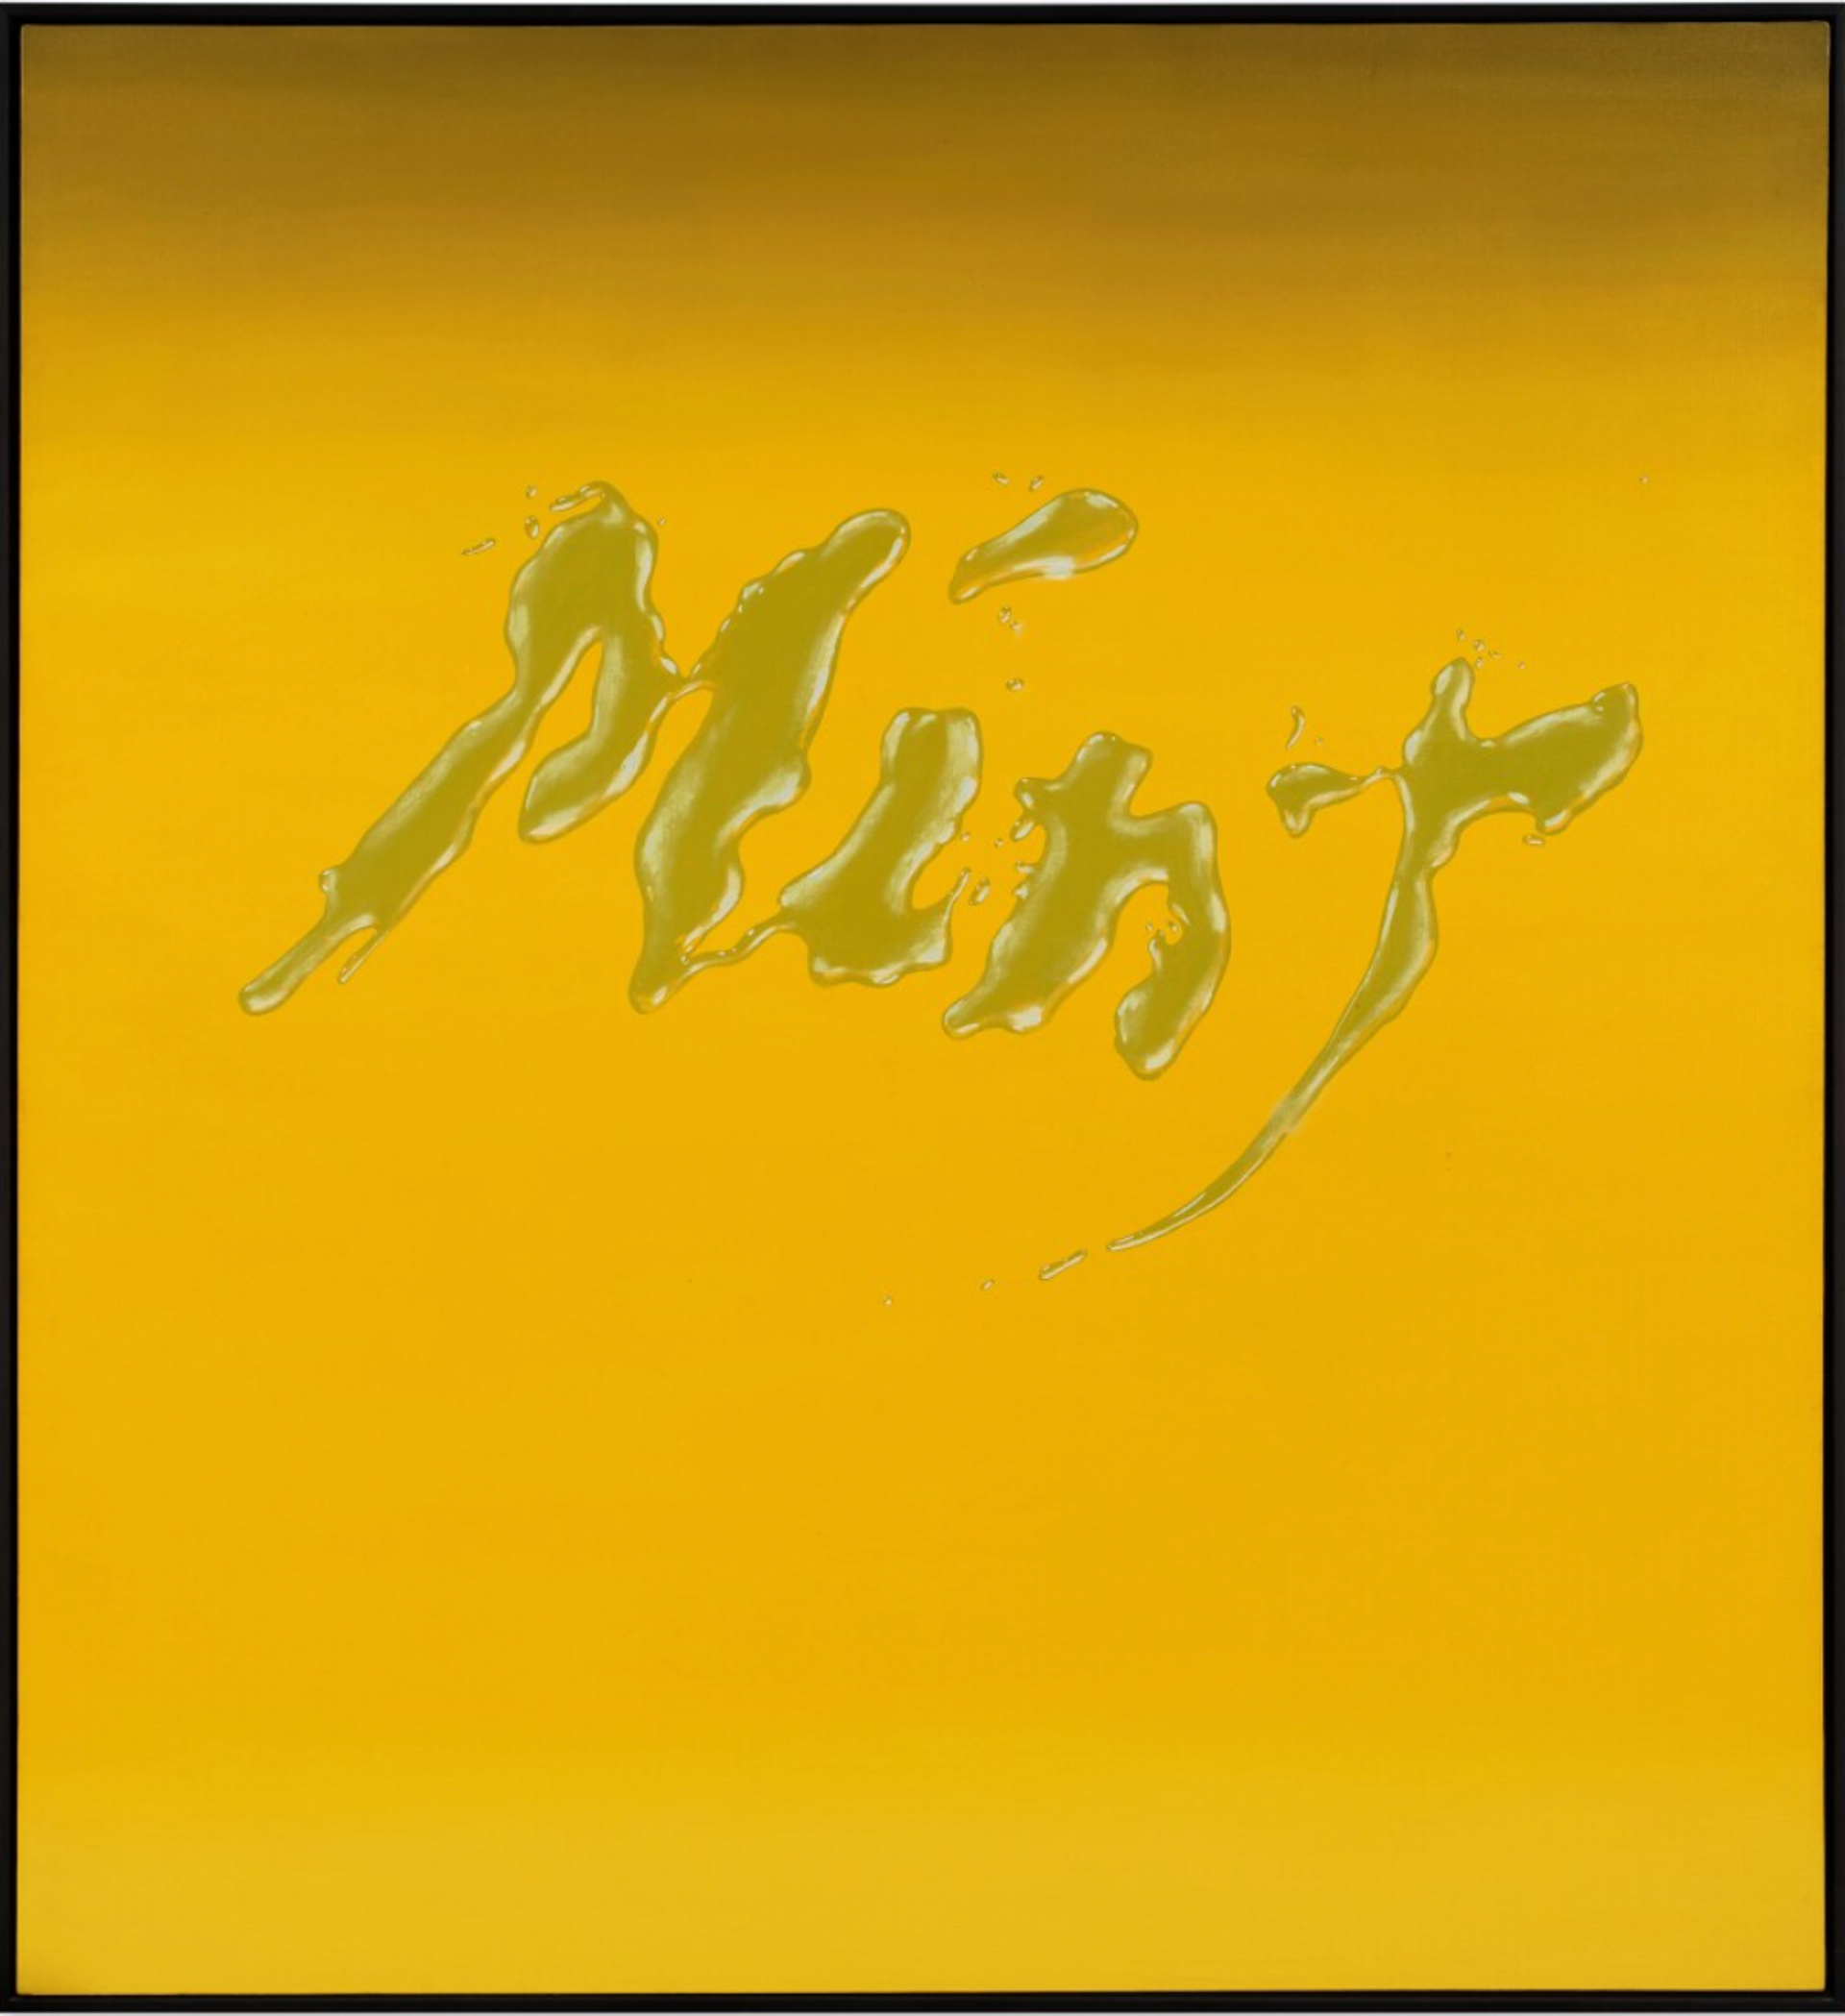 Painting by Ed Ruscha depicting the word 'mint' in a murky green colour against a mustard yellow background. The lettering is fluid and uneven, resembling liquid.